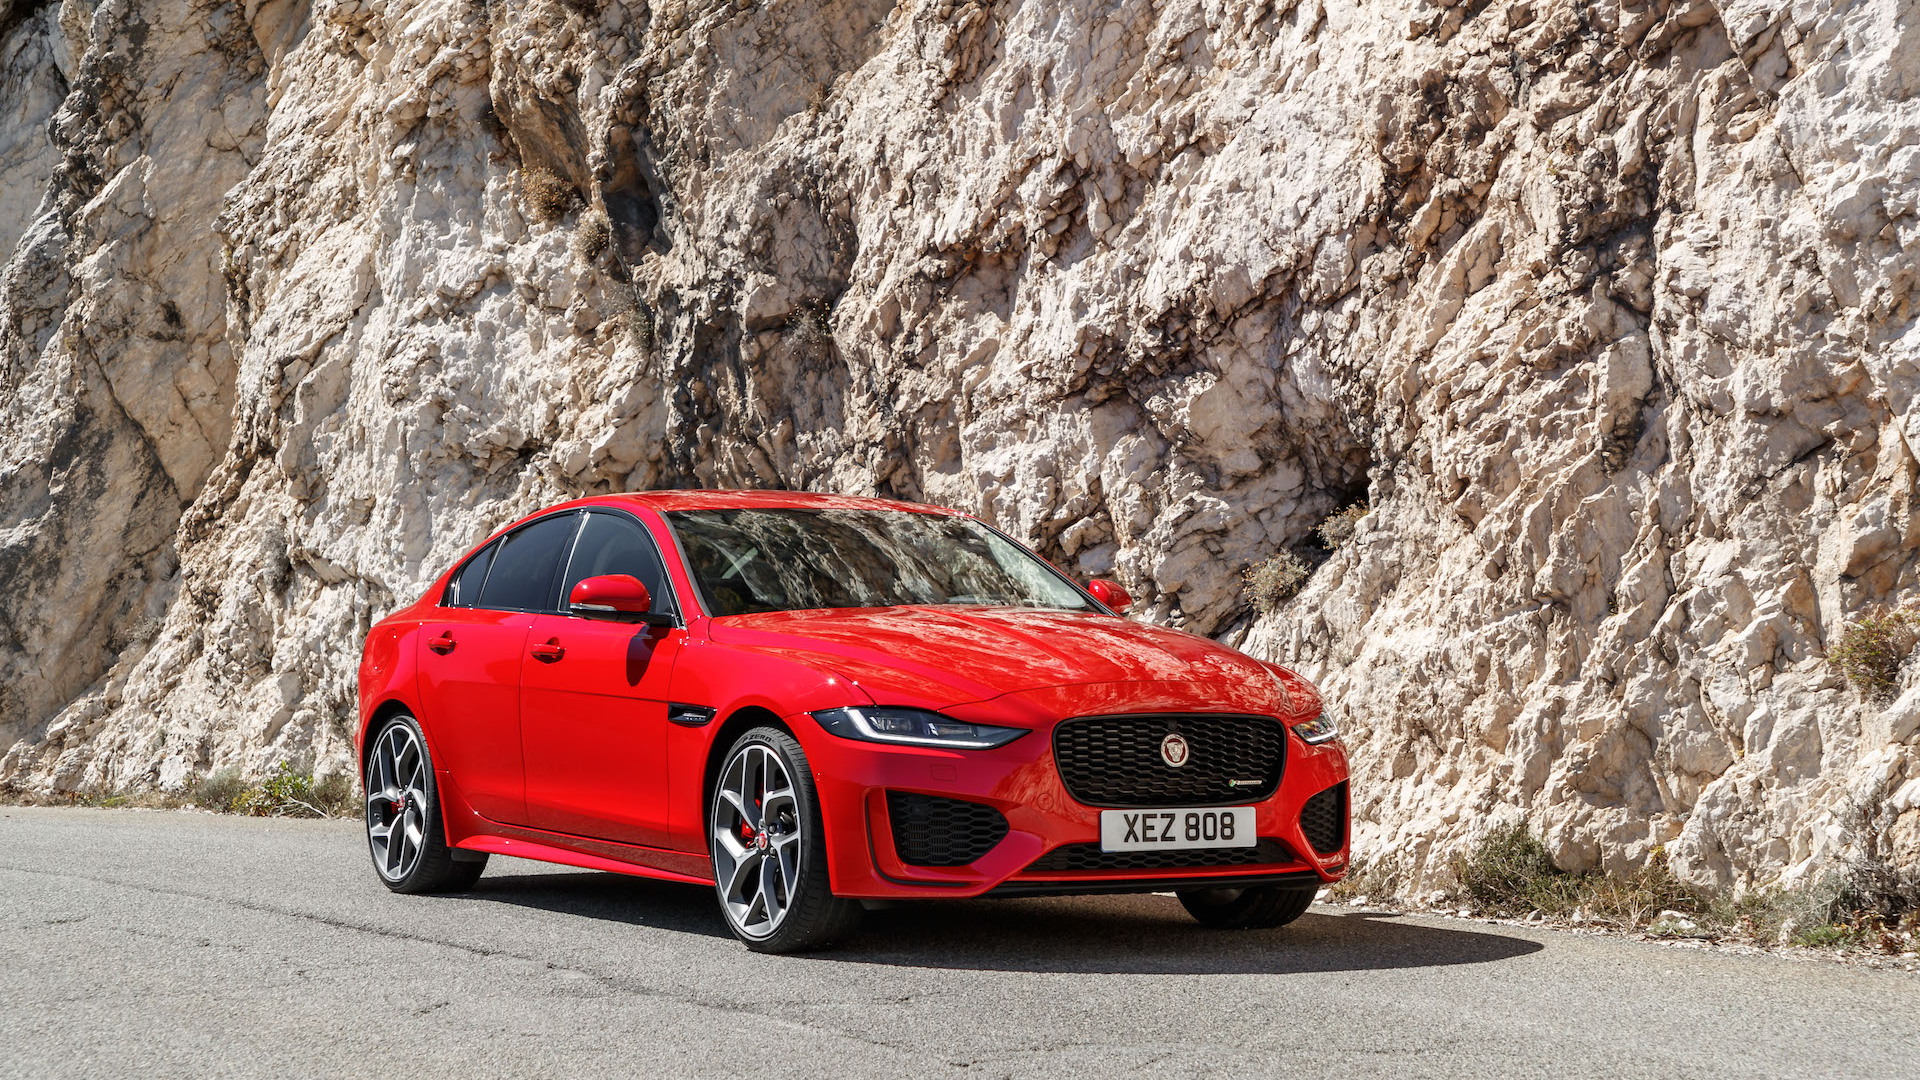 First drive review: The 2020 Jaguar XE puts gravity on hold